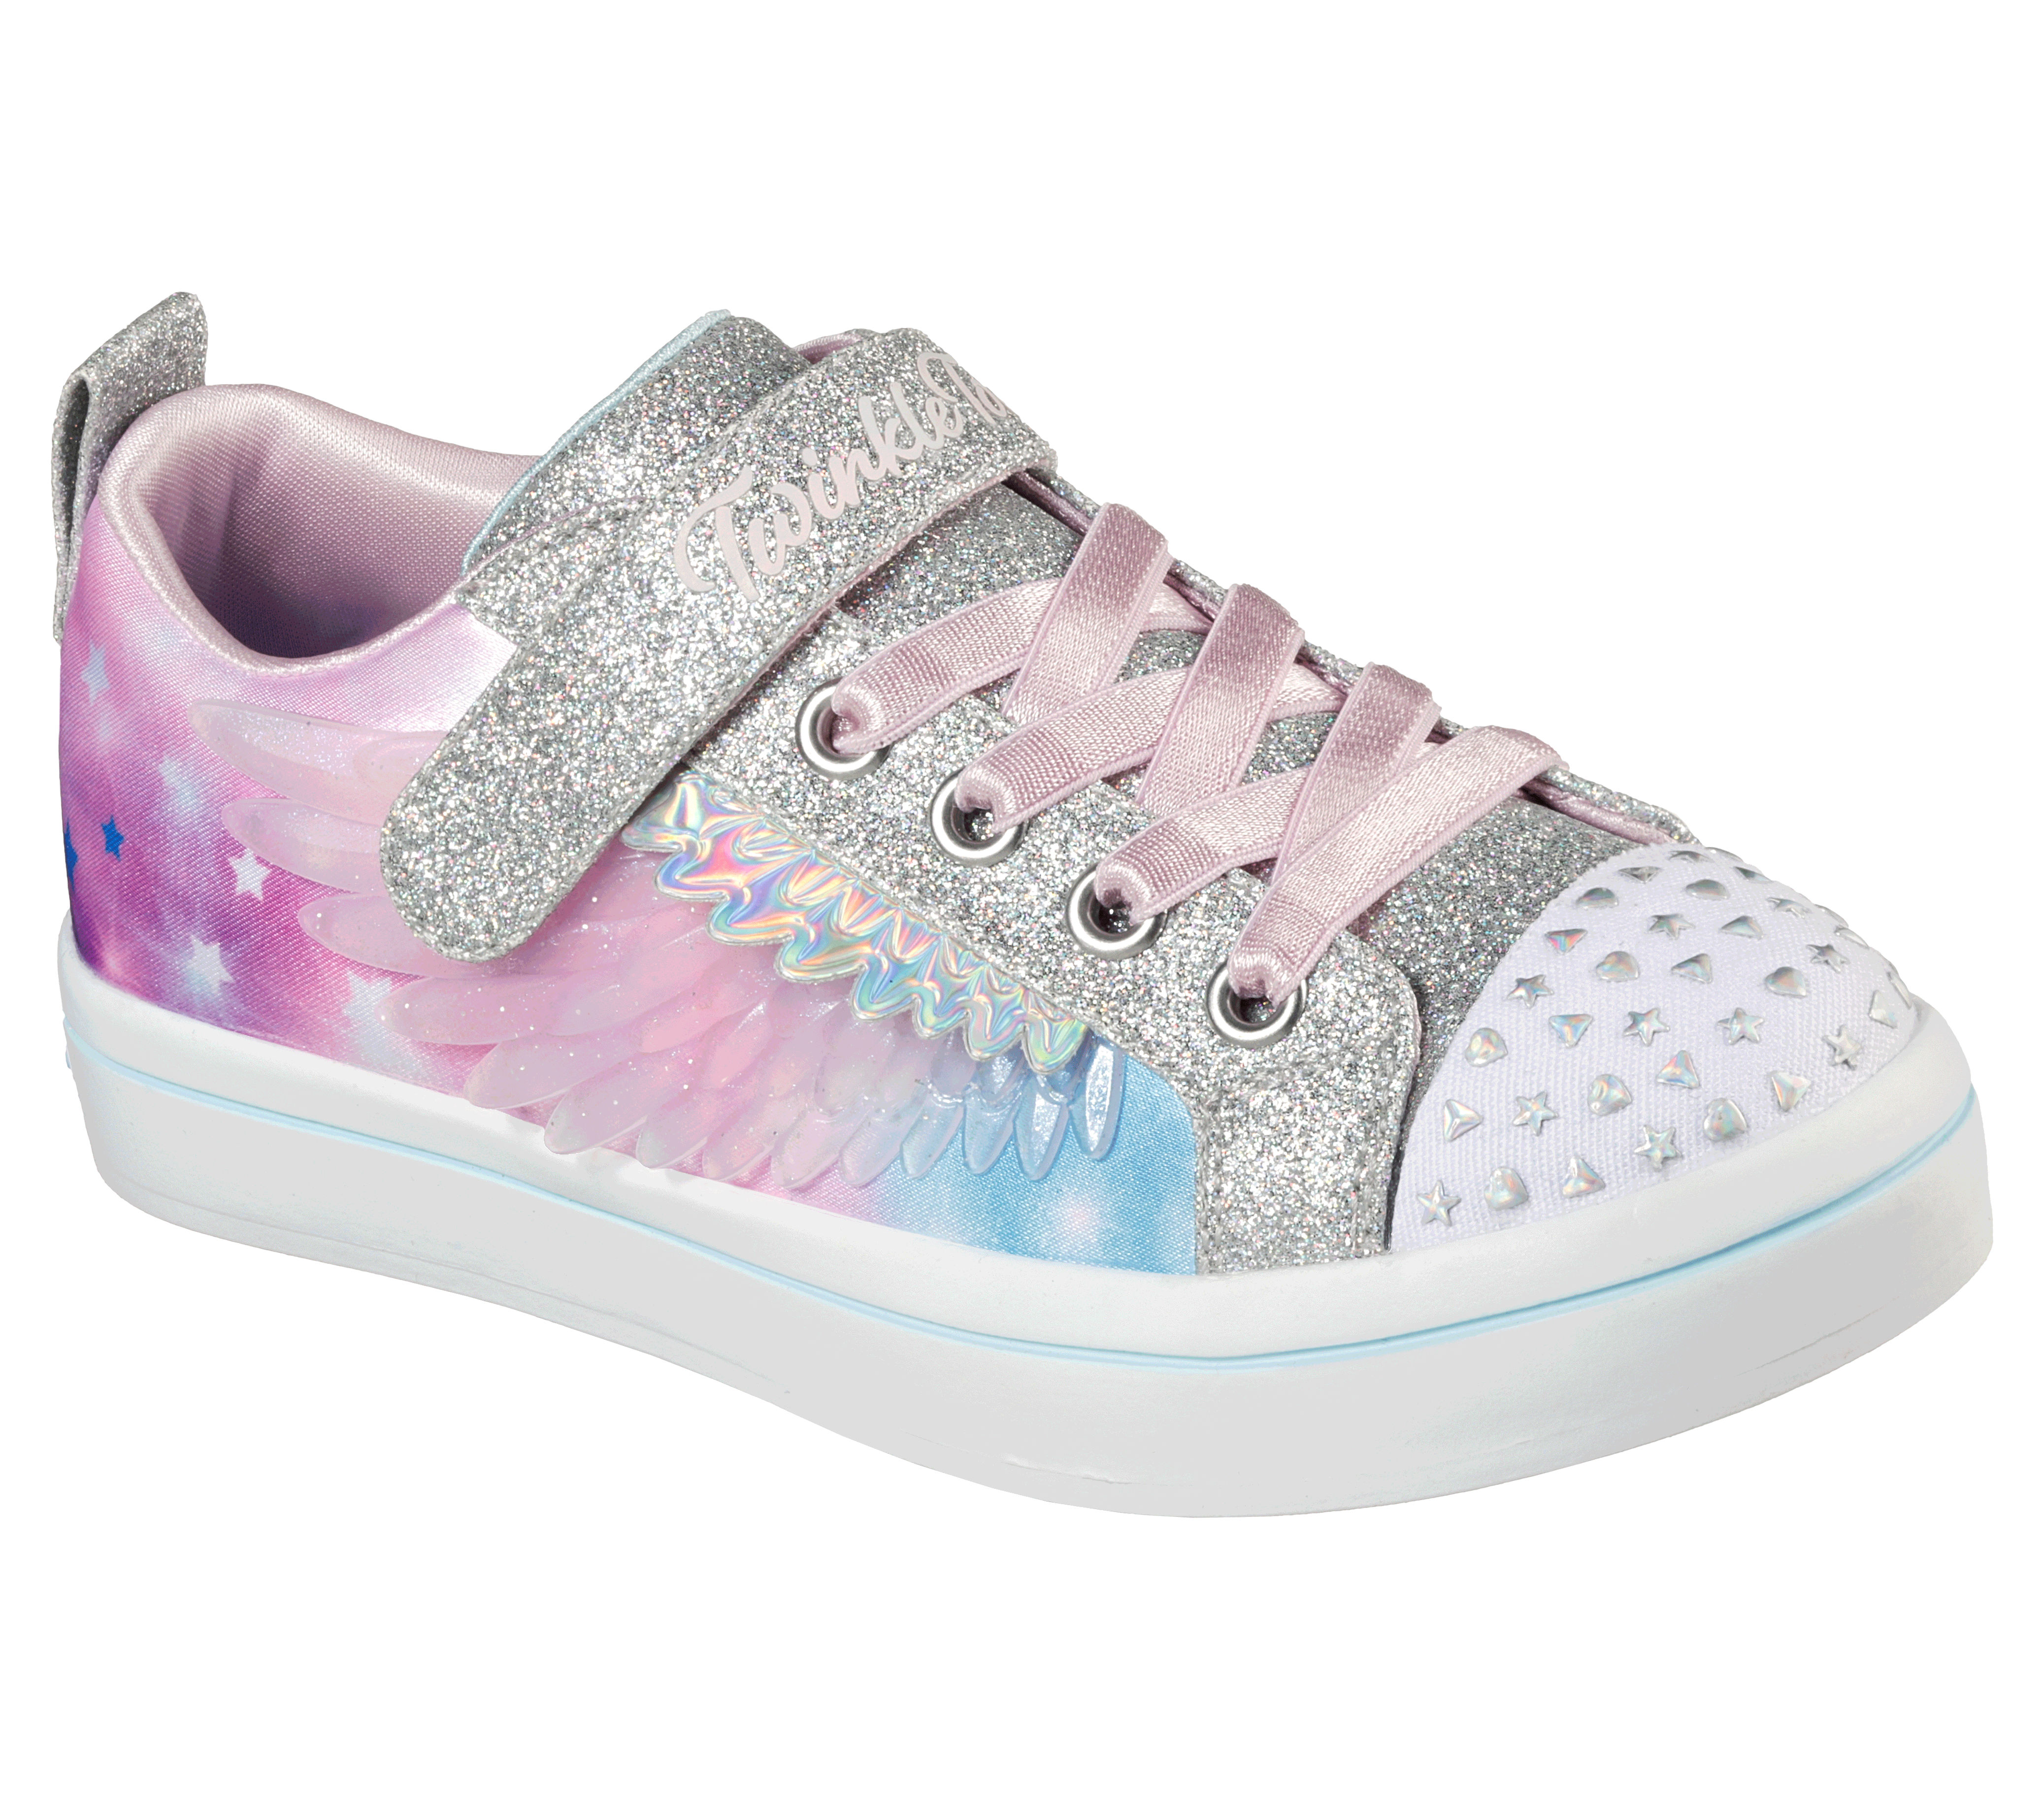 skechers twinkle toes price in philippines